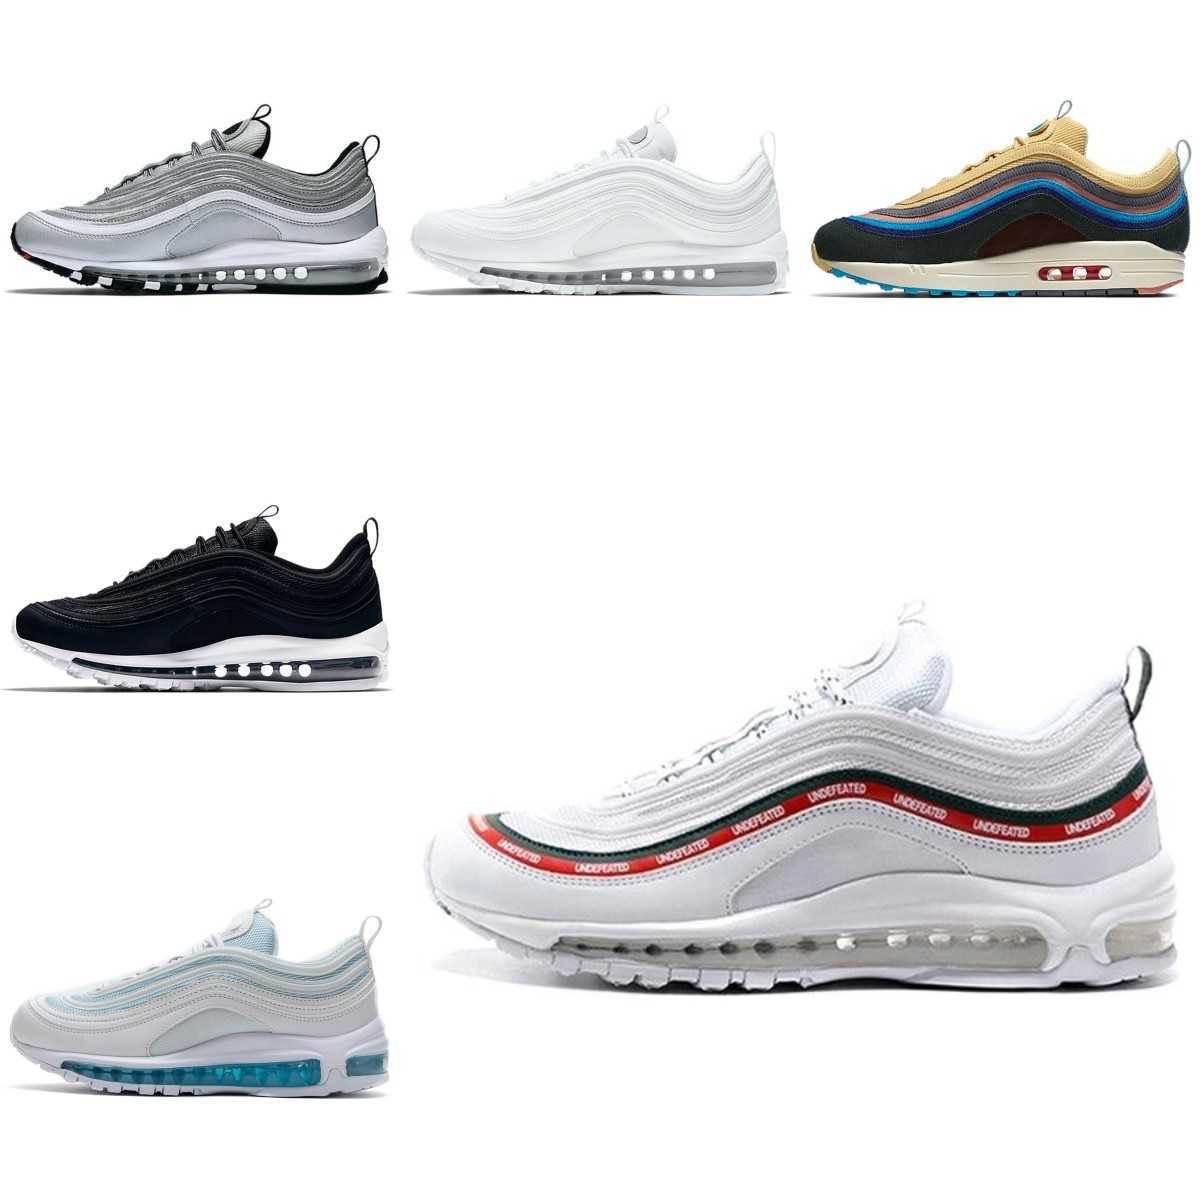 

2023 Designer AIR MAX 97 Running Shoes Men Women Sean Wotherspoon 97s Triple Black White Silver Bullet Gold South Beach Ghost Mens Trainers Sports Sneakers Size, Shau